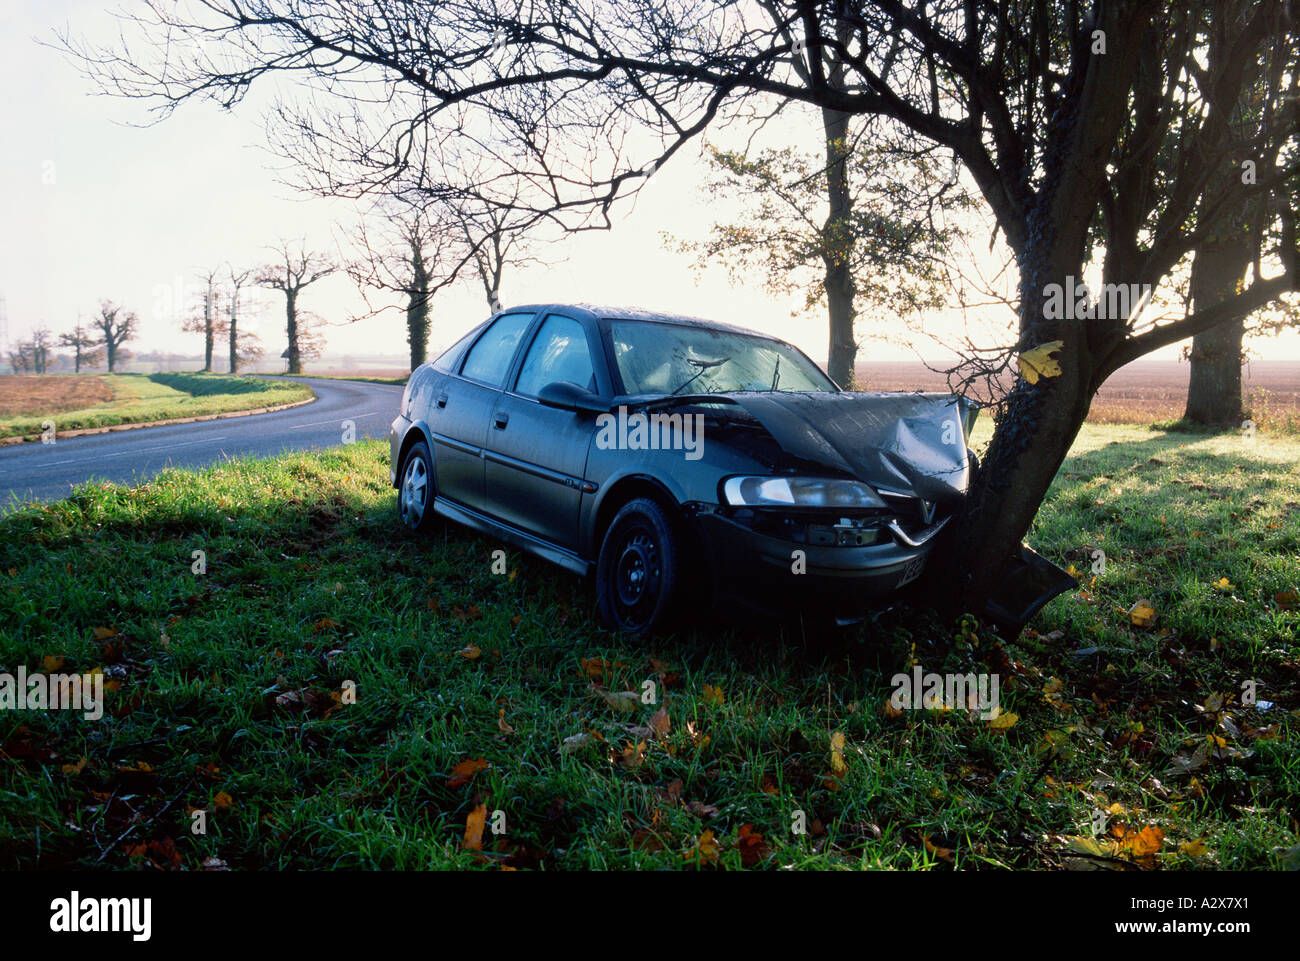 Road accident. Car wreck on hitting tree. Stock Photo